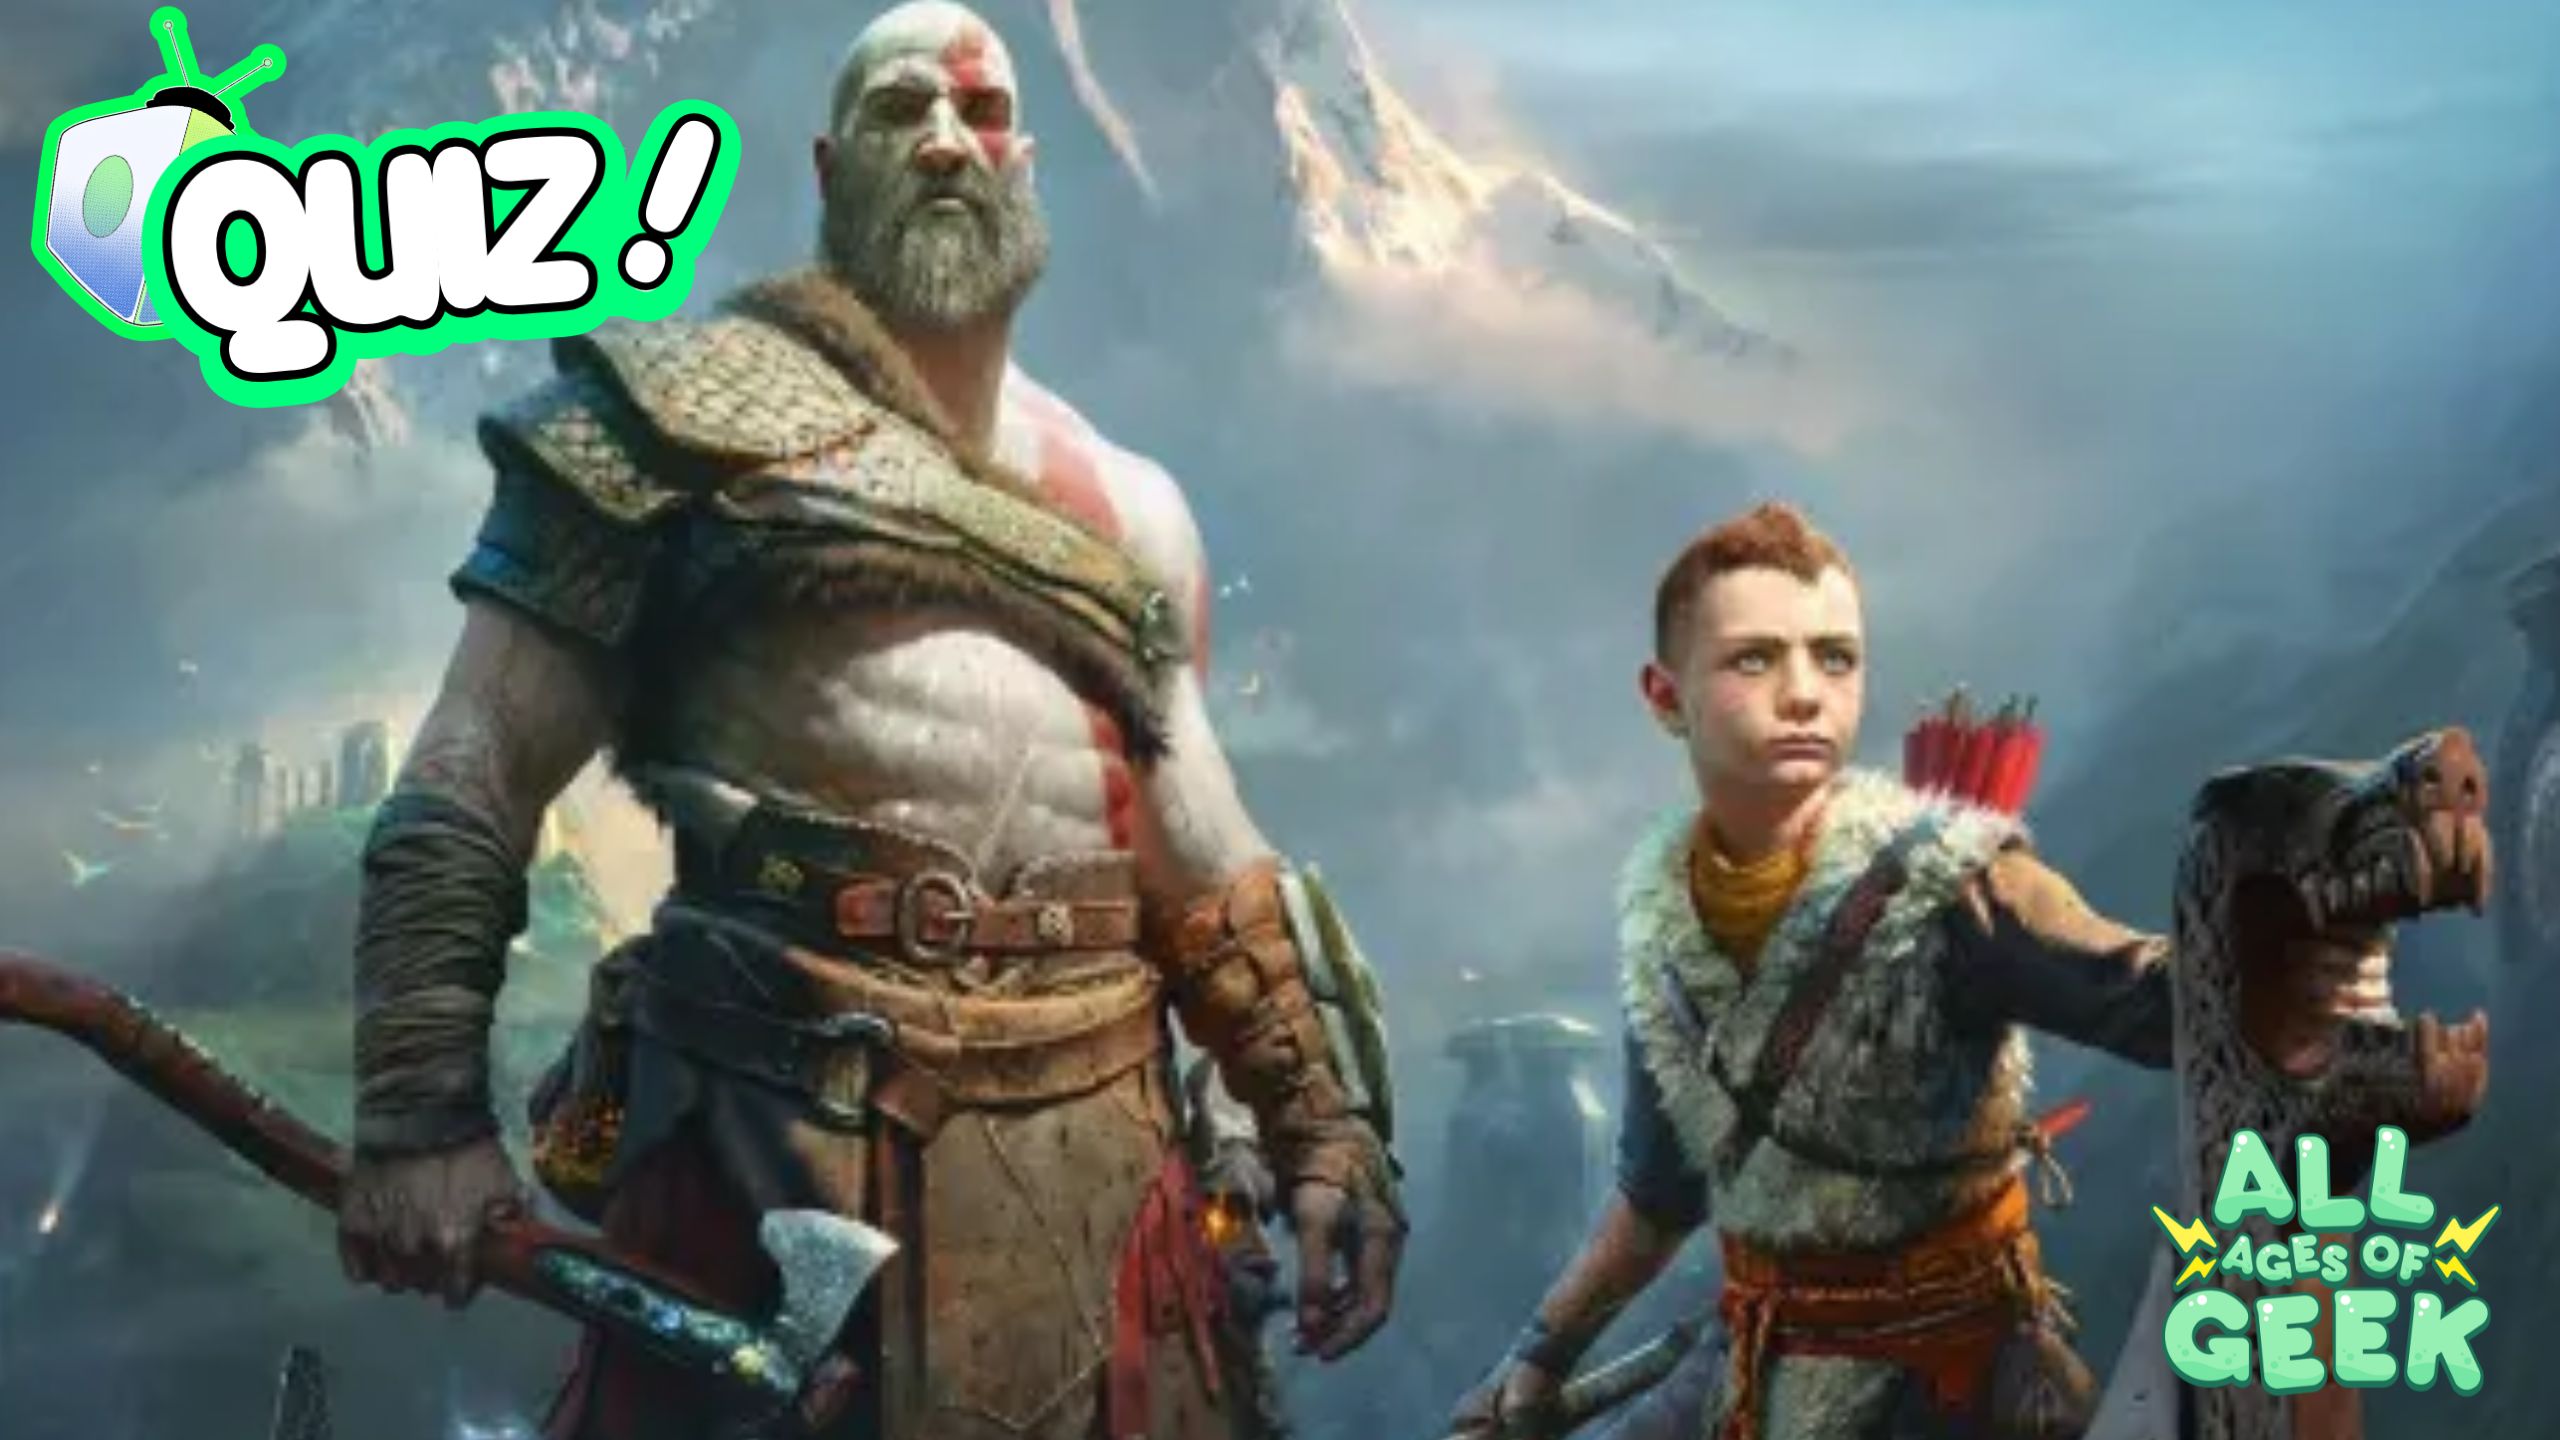 Which God of War Character Are You? Take the Quiz to Find Out!